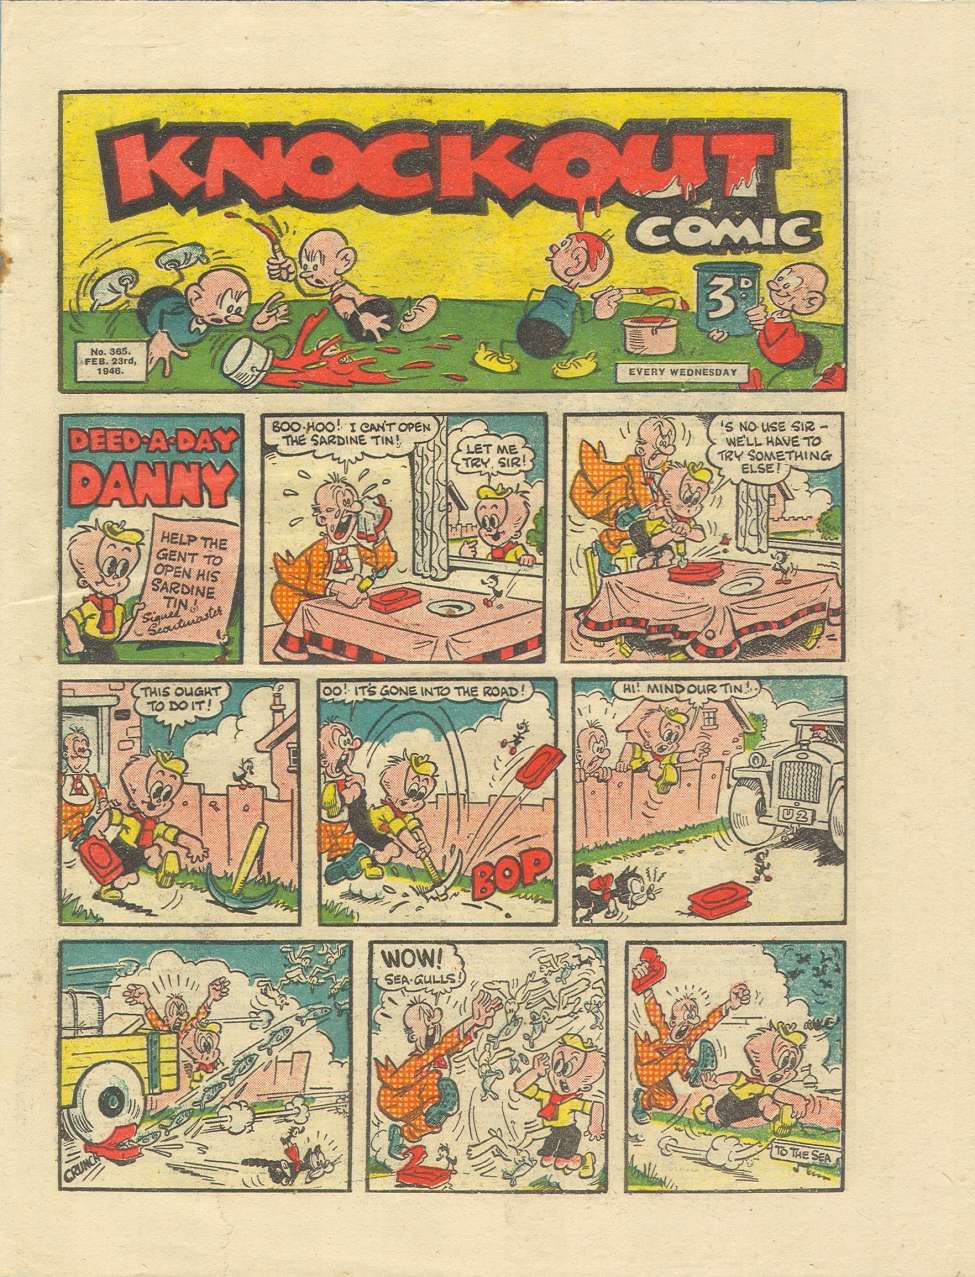 Comic Book Cover For Knockout 365